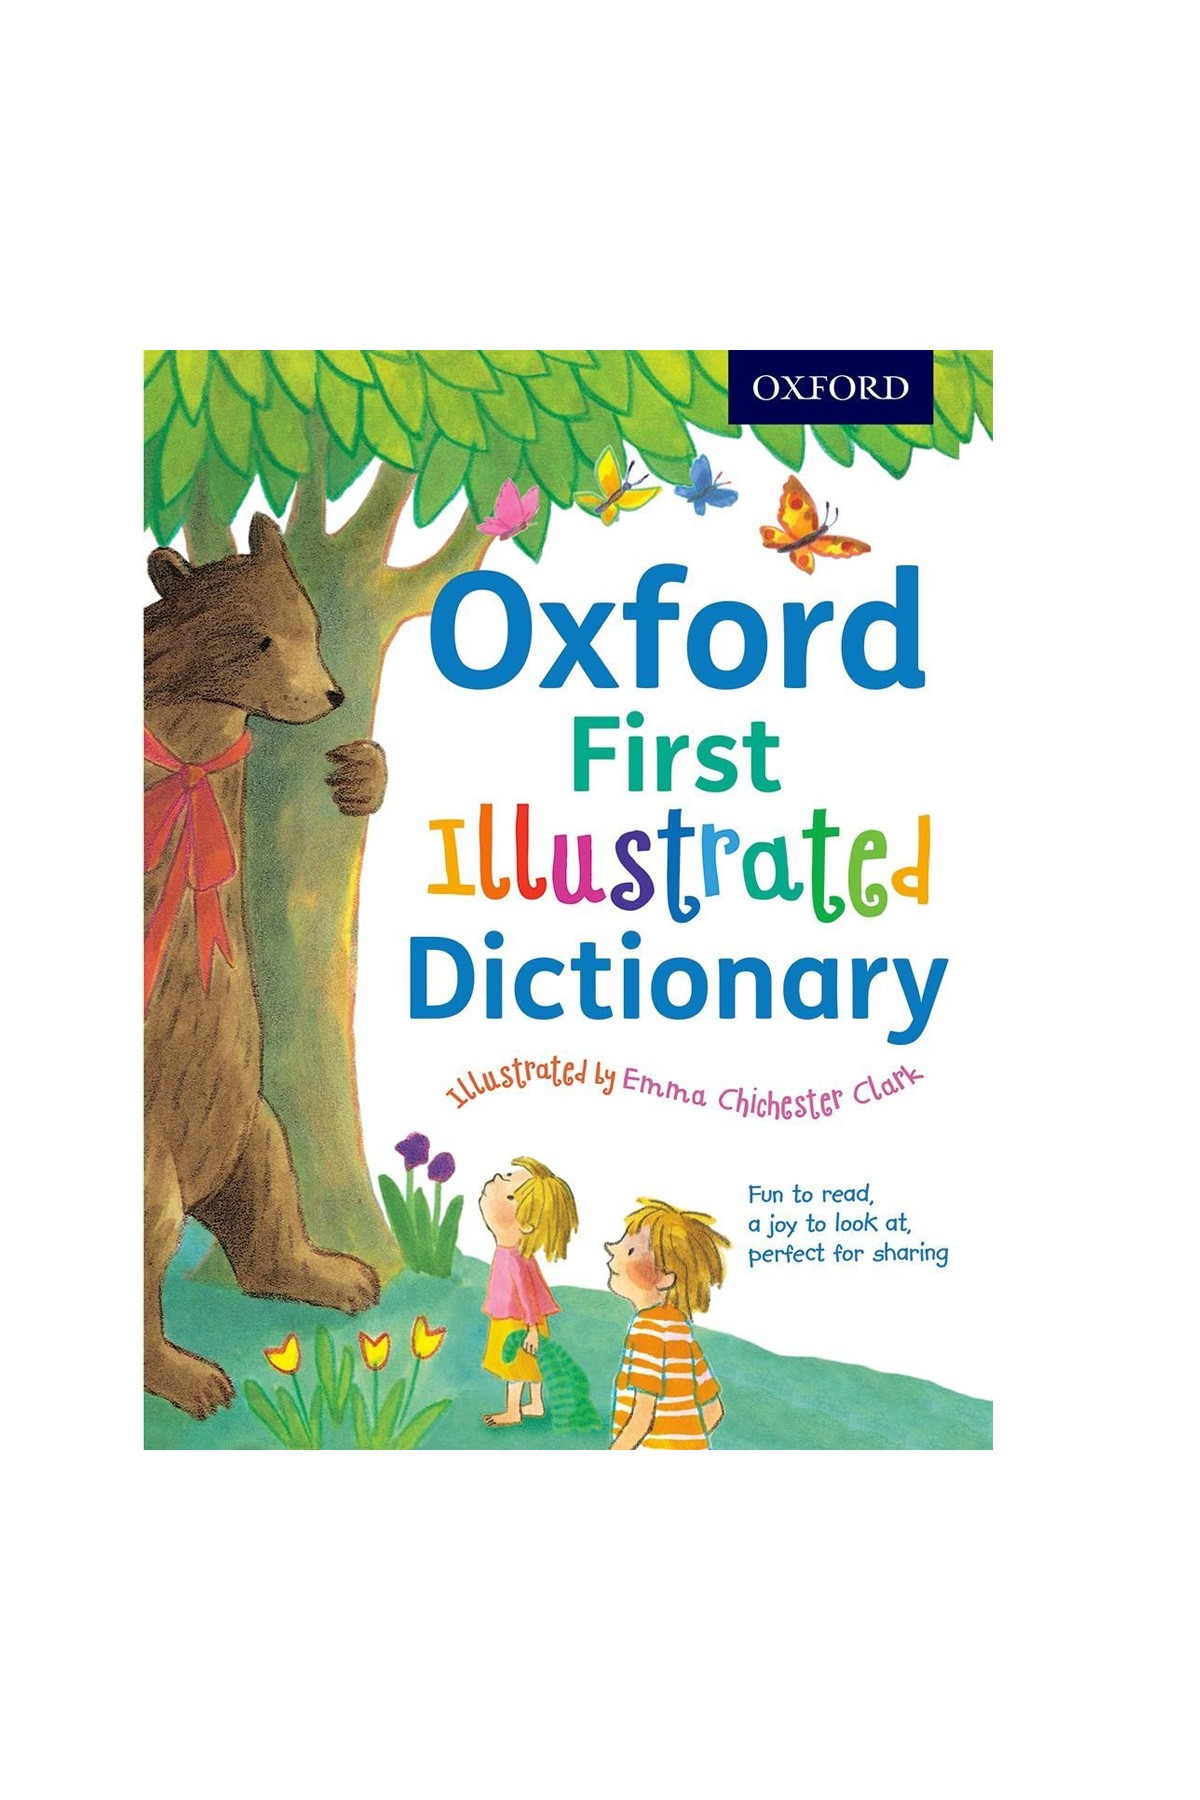 Oxford Childrens Book - Oxford First Illustrated Dictionary